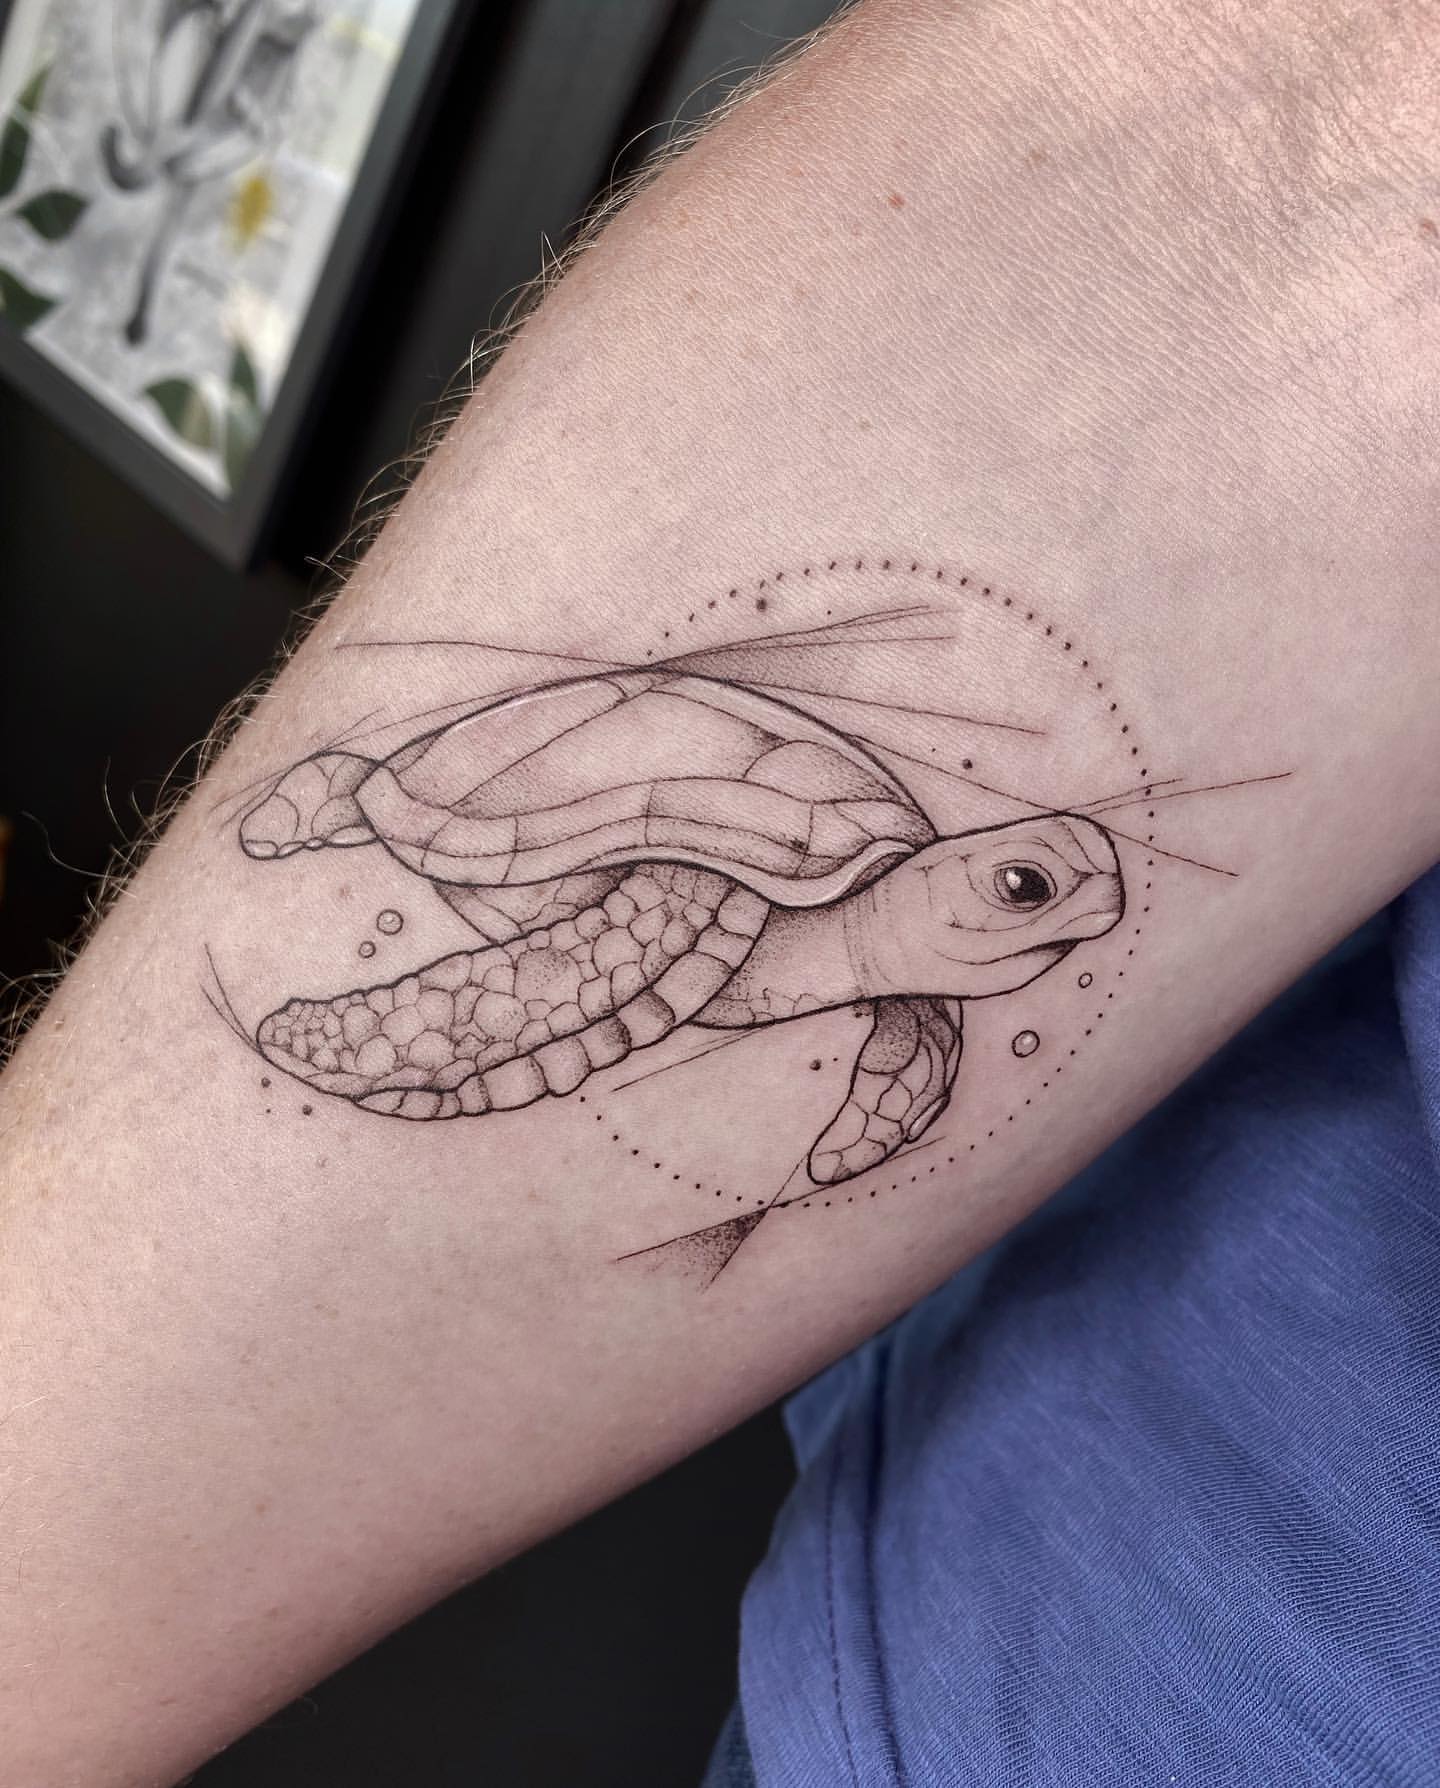 Precise Lines and Stipples Detail Tattoos of Exquisite Scientific Studies  by Michele Volpi  Colossal